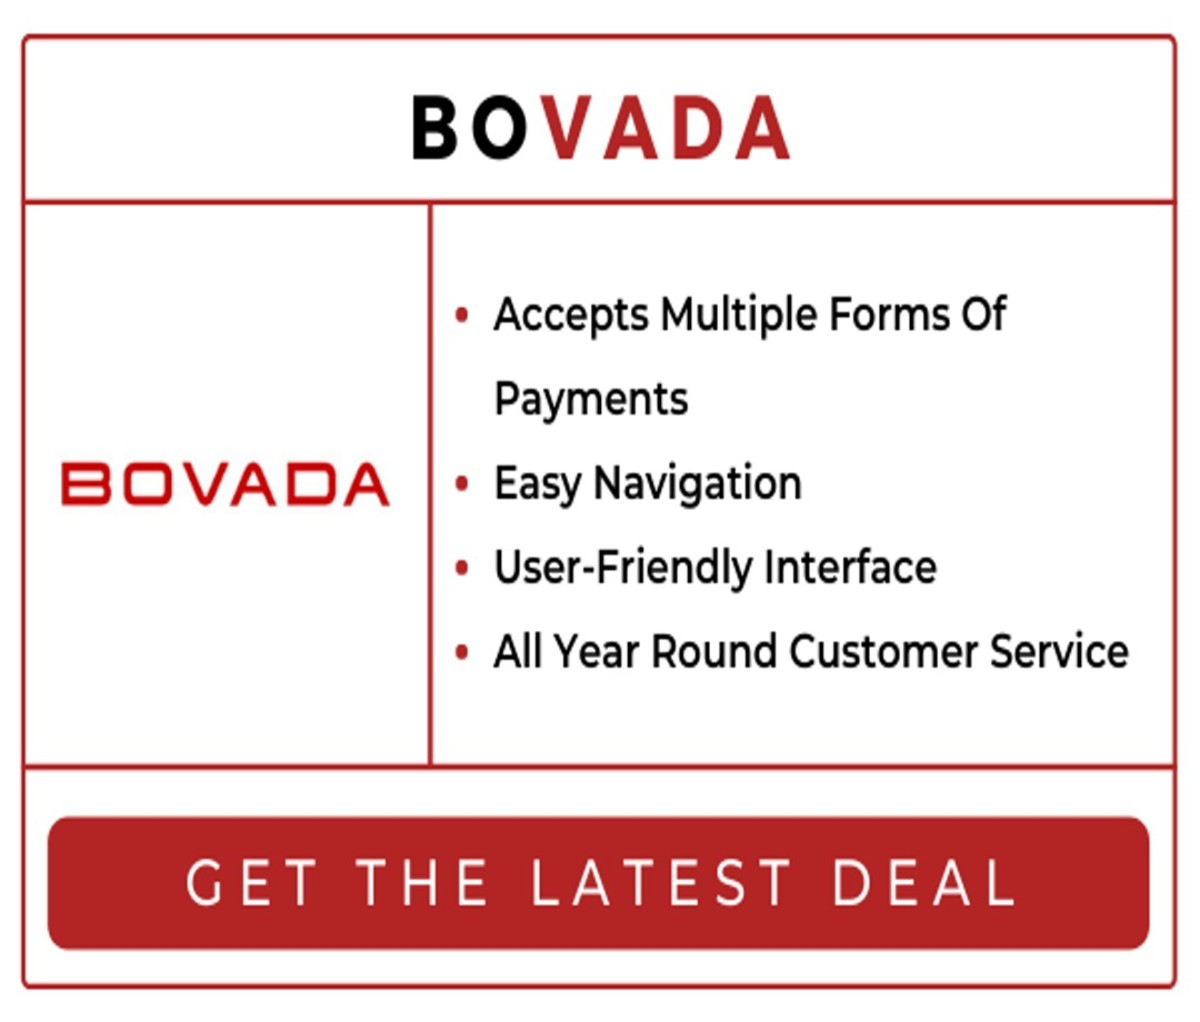 Bovada - Most Trusted User Interface Online Site